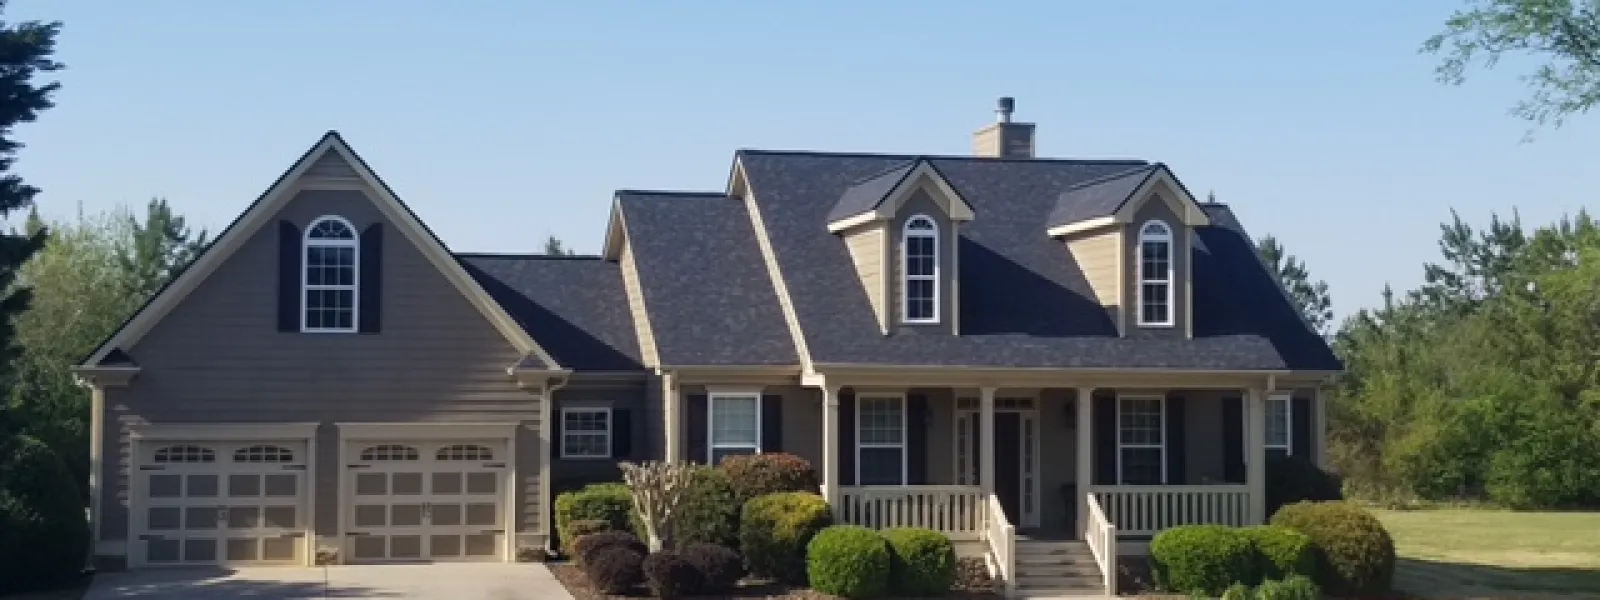 ARAC Roof It Forward Full Roof Replacement in Taylorsville, Georgia